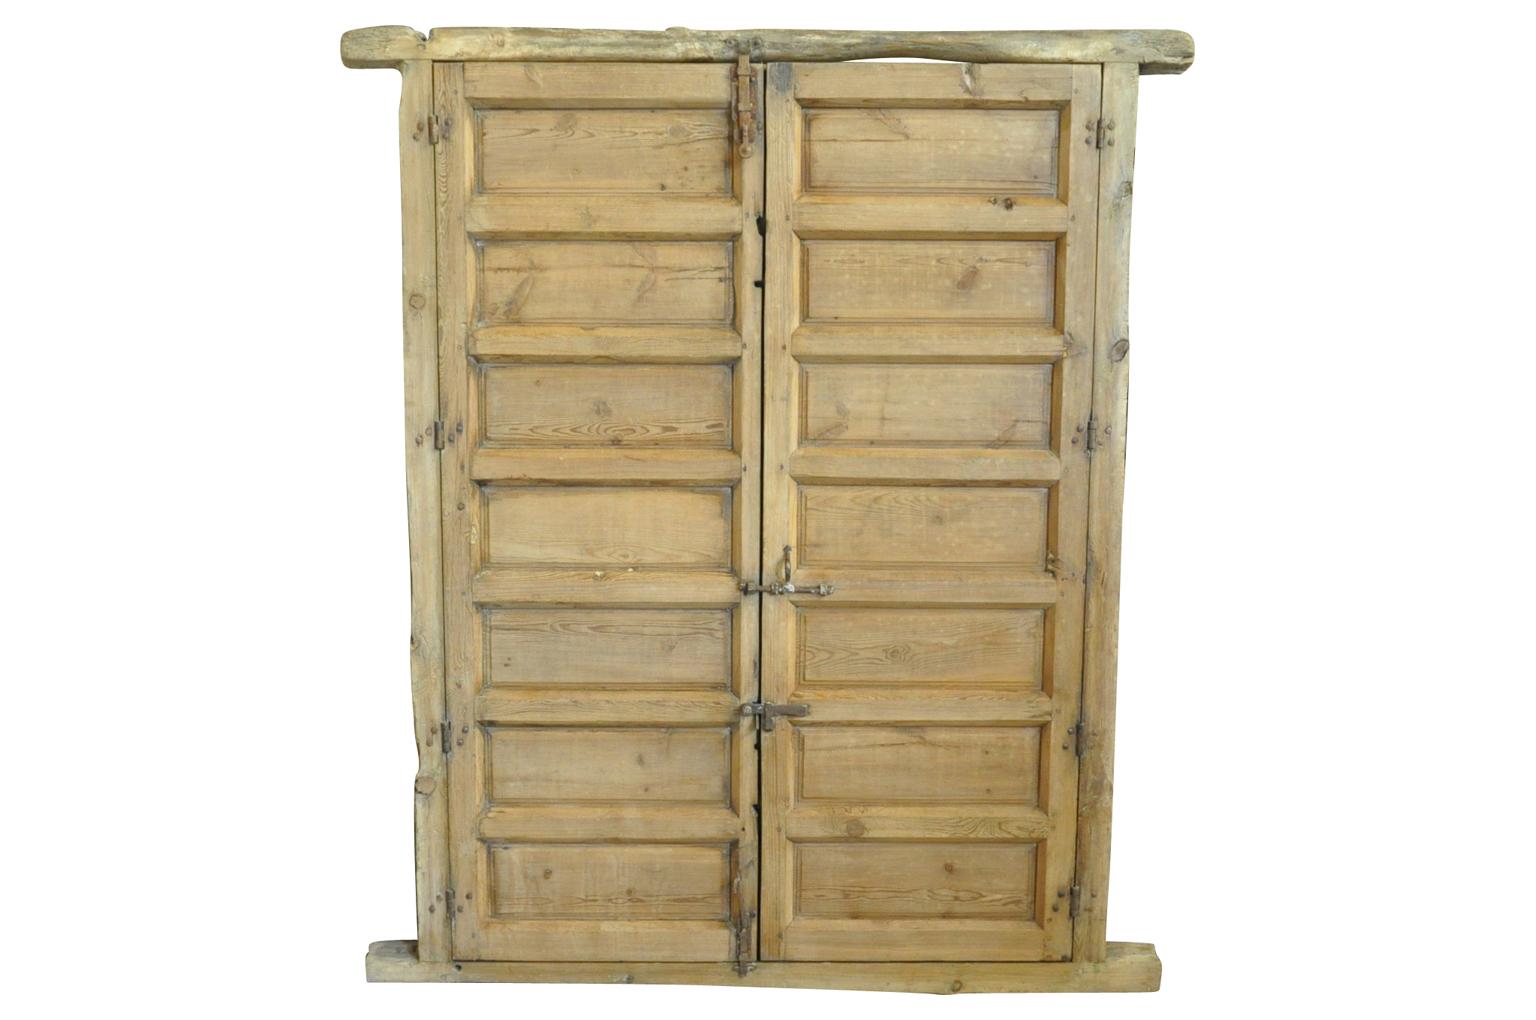 An outstanding pair of 17th century doors in their surround from the Catalan region of Spain. Handsomely constructed from Meleze wood. Beautiful to build into any interior or exterior door way - or used as a headboard for a bed.